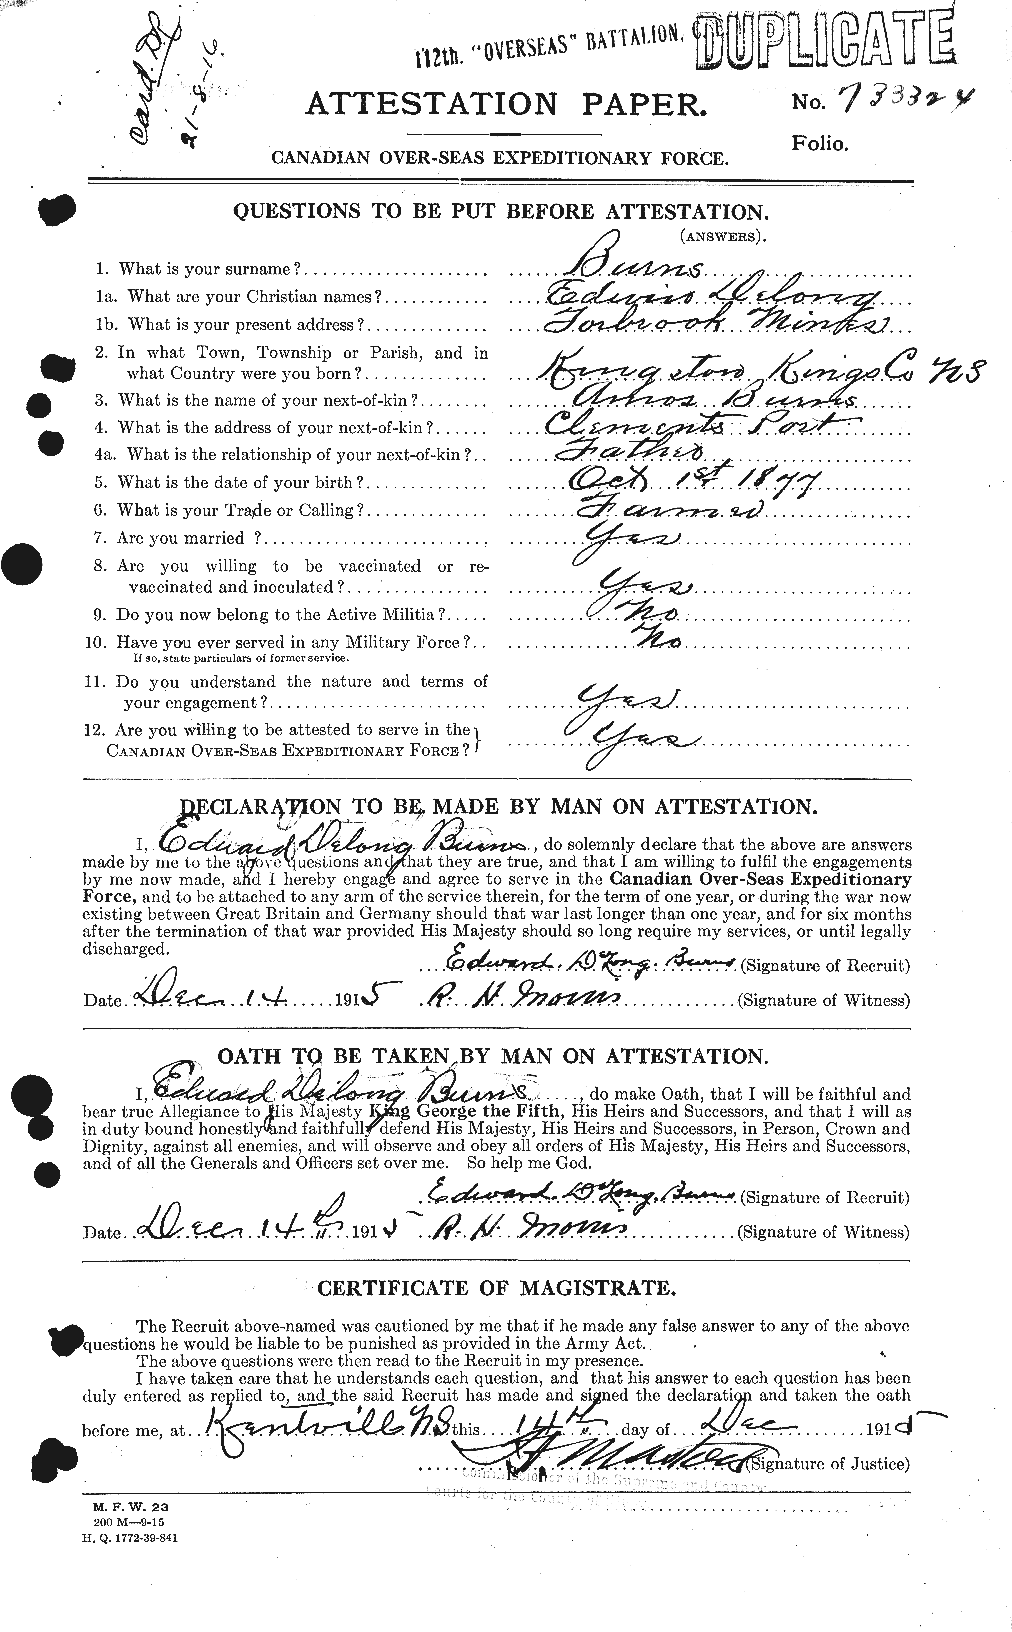 Personnel Records of the First World War - CEF 274083a